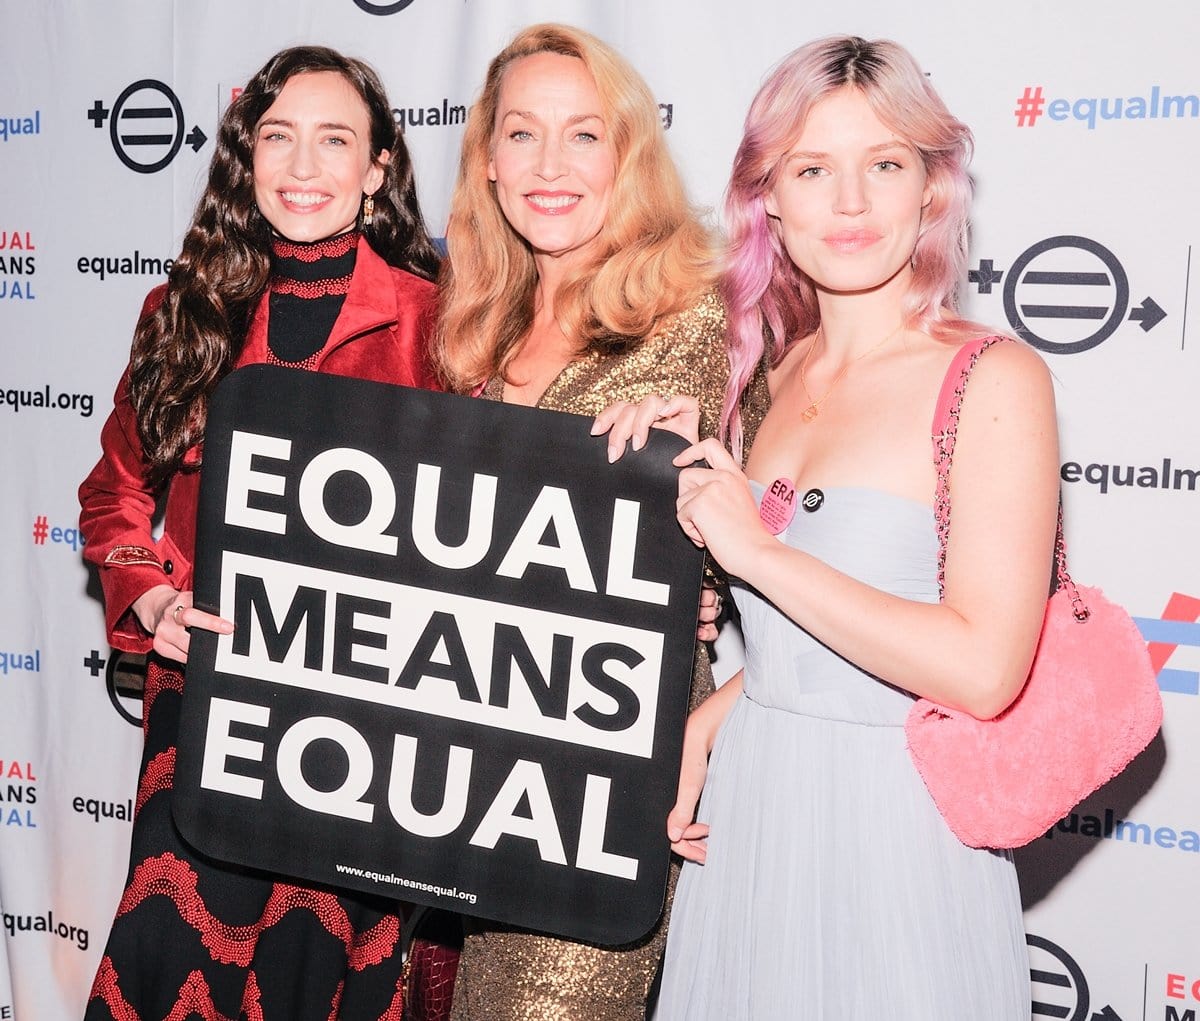 Jerry Hall with her lookalike daughters Elizabeth Jagger and Georgia May Jagger attend the Equal Means Equal event